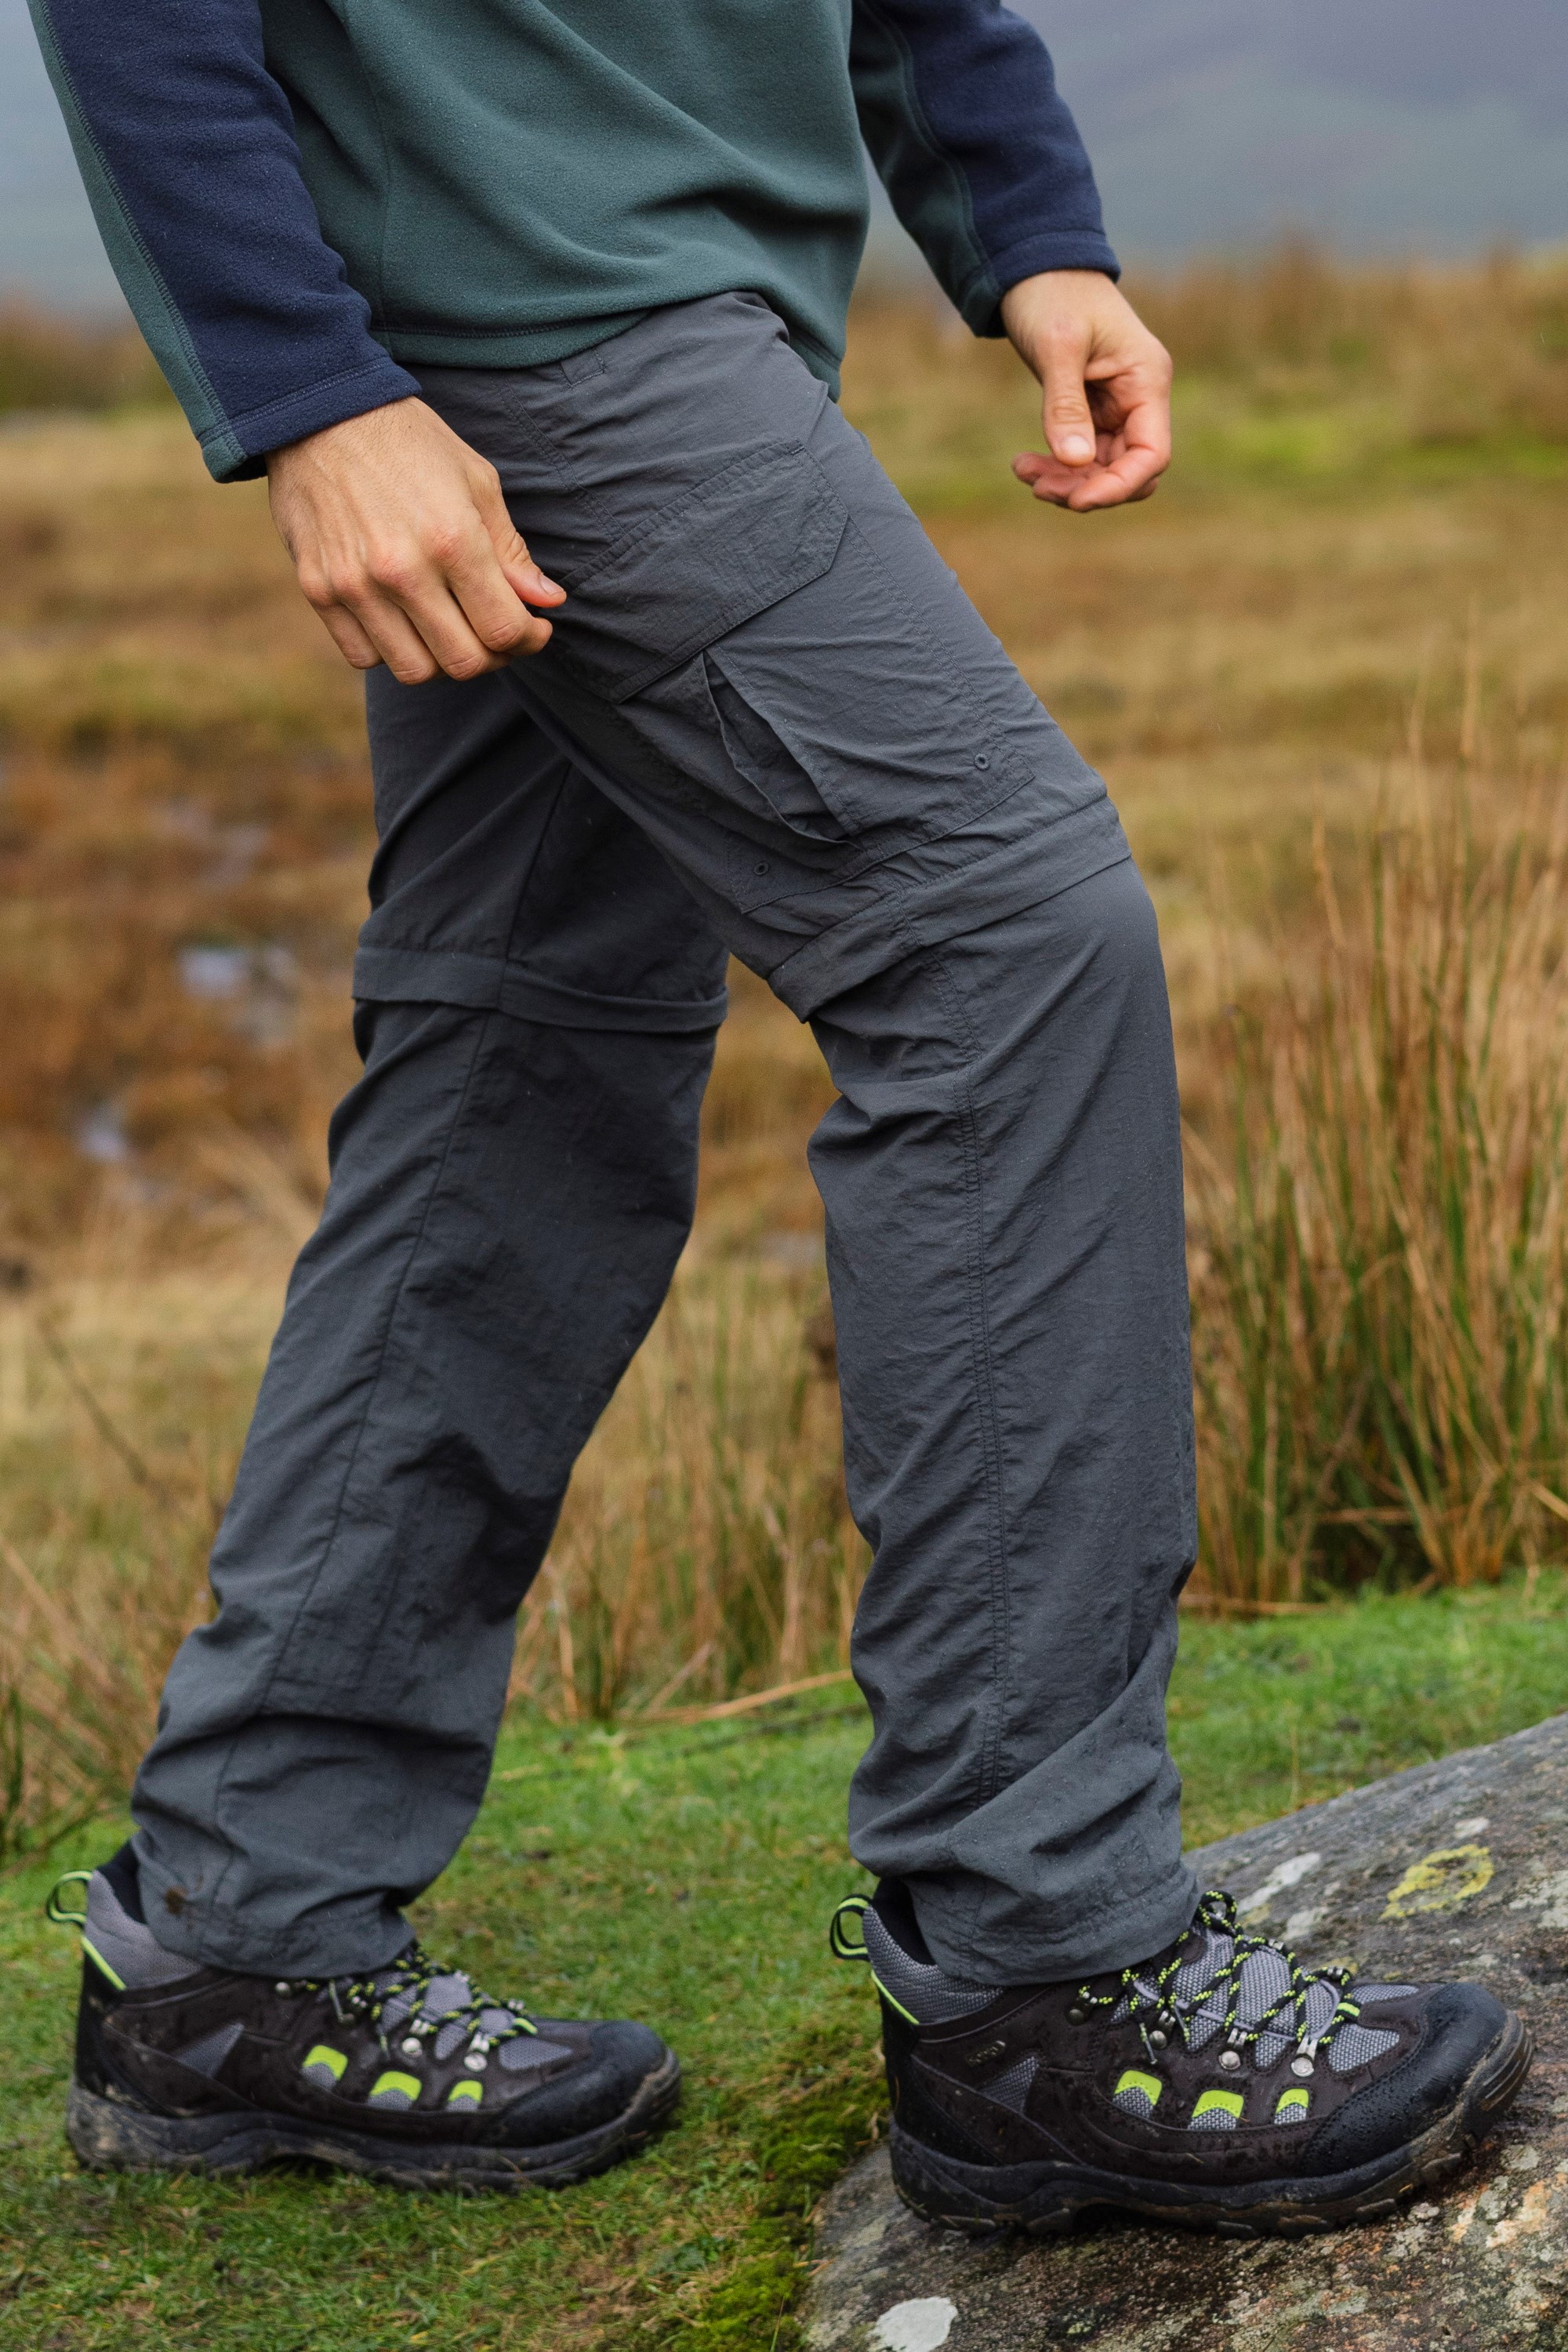 Women's Walking Trousers, Stretchy, Lightweight Hiking Trousers